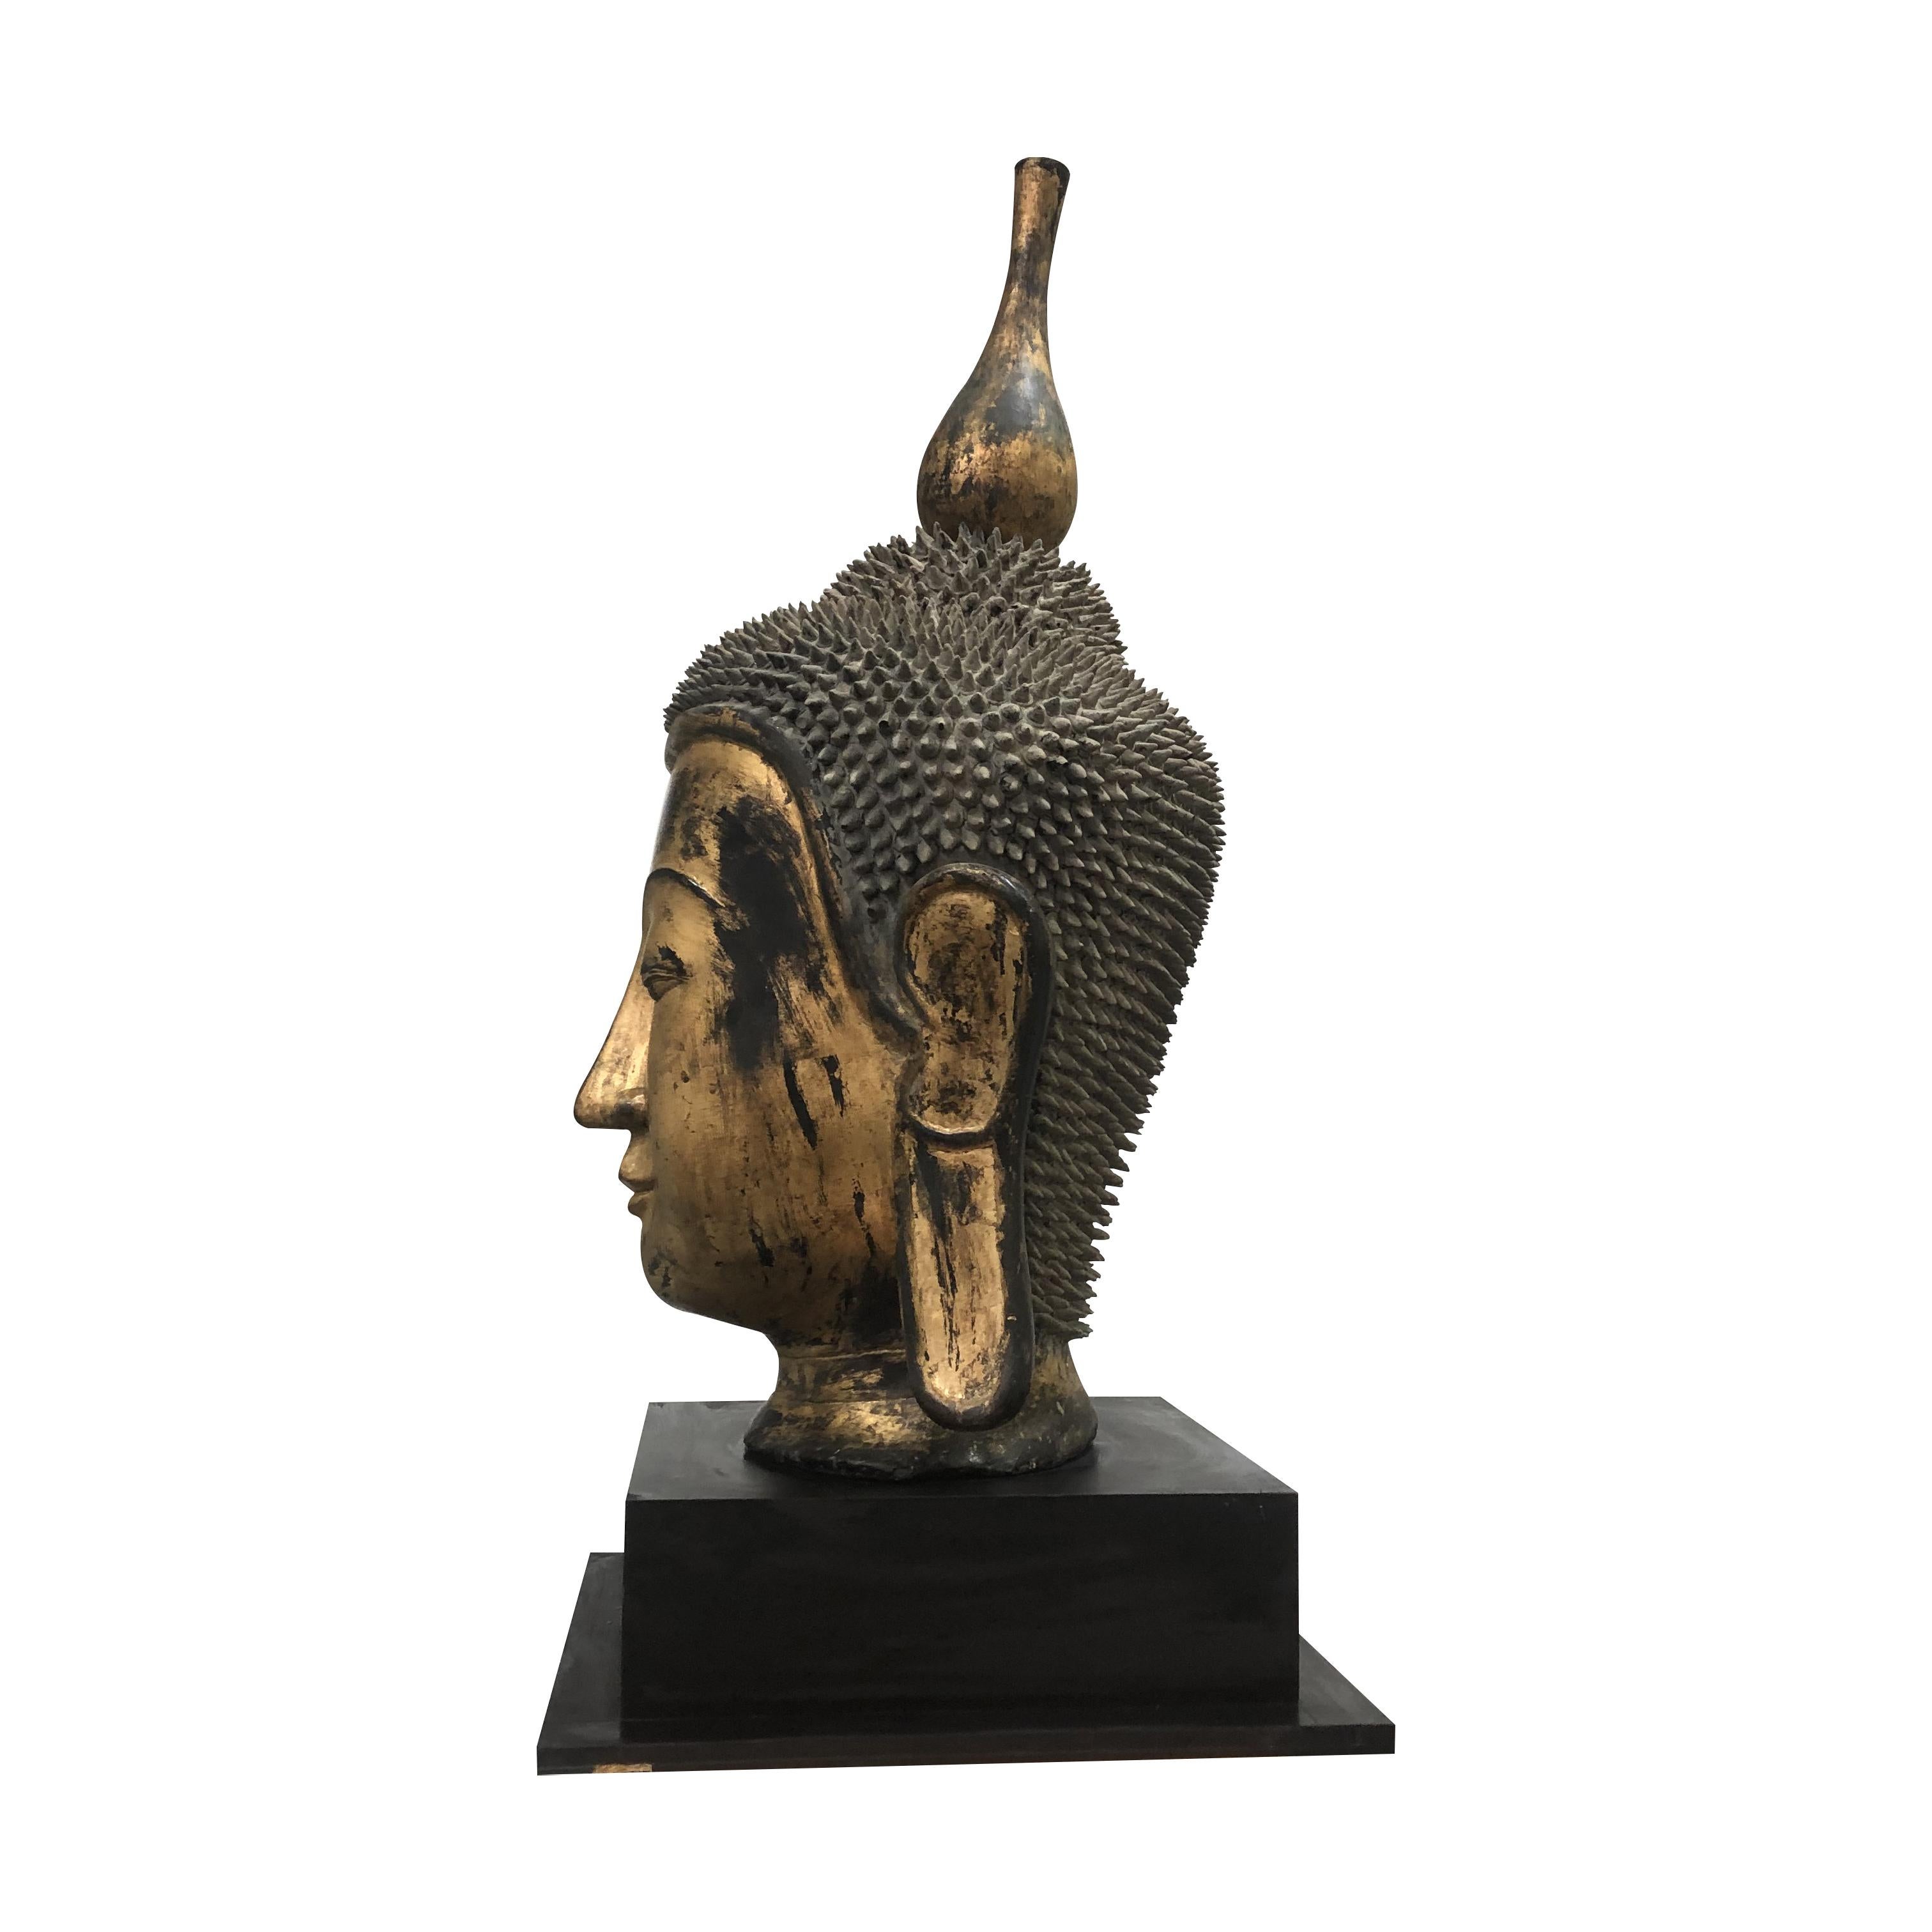 A stunning, highly decorative, monumental Shan Burmese dry lacquer gilt Buddha head sculpture on a wood stand, early 20th century. The Buddha's round face is framed by long pendulous earlobes. The sculpture is initially made of papier mâché and